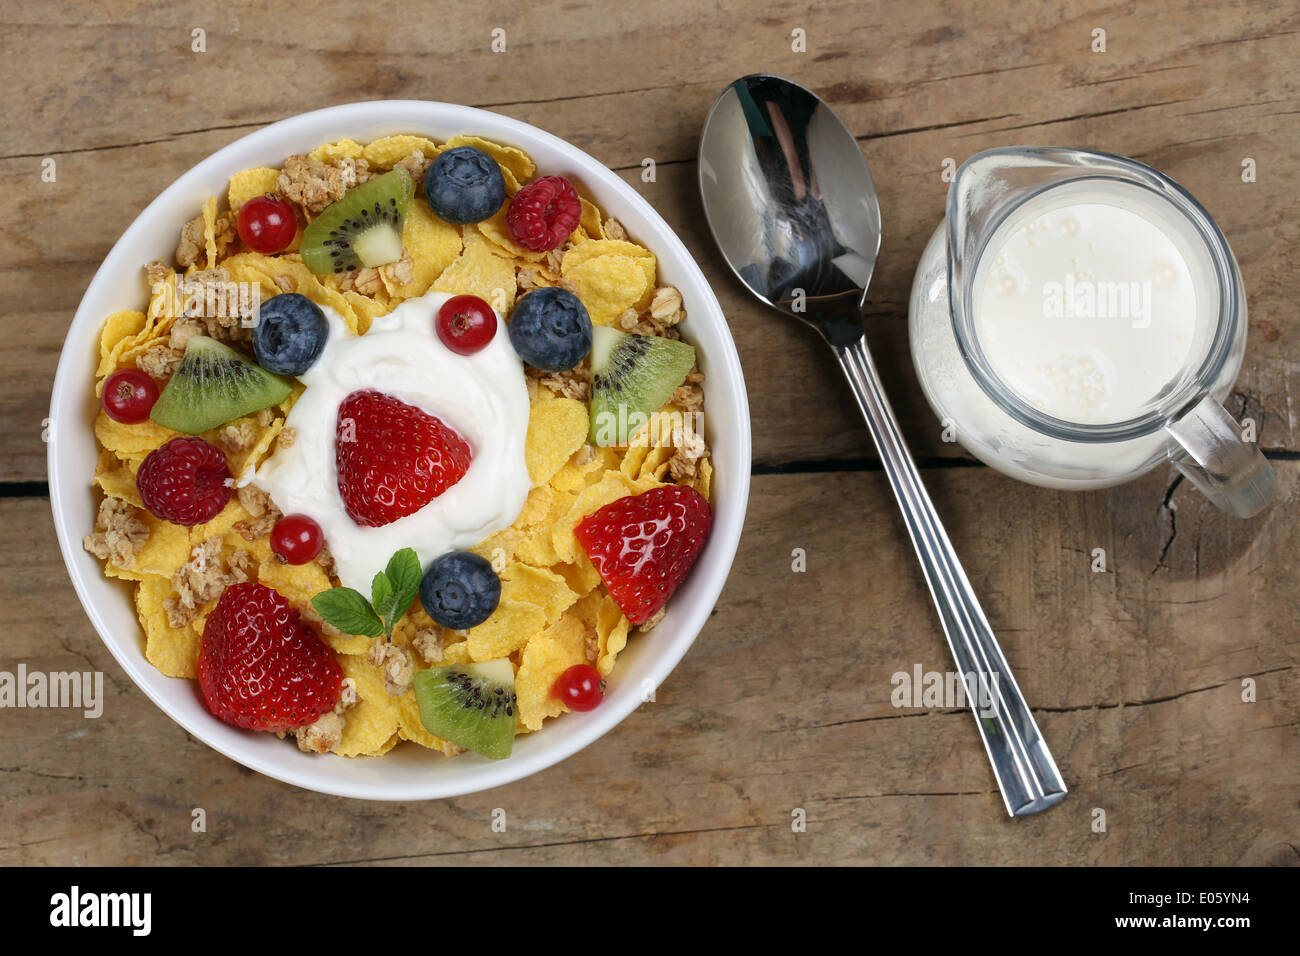 Fruit cereals with yogurt and milk, strawberries, raspberries, kiwi and blueberries from above Stock Photo